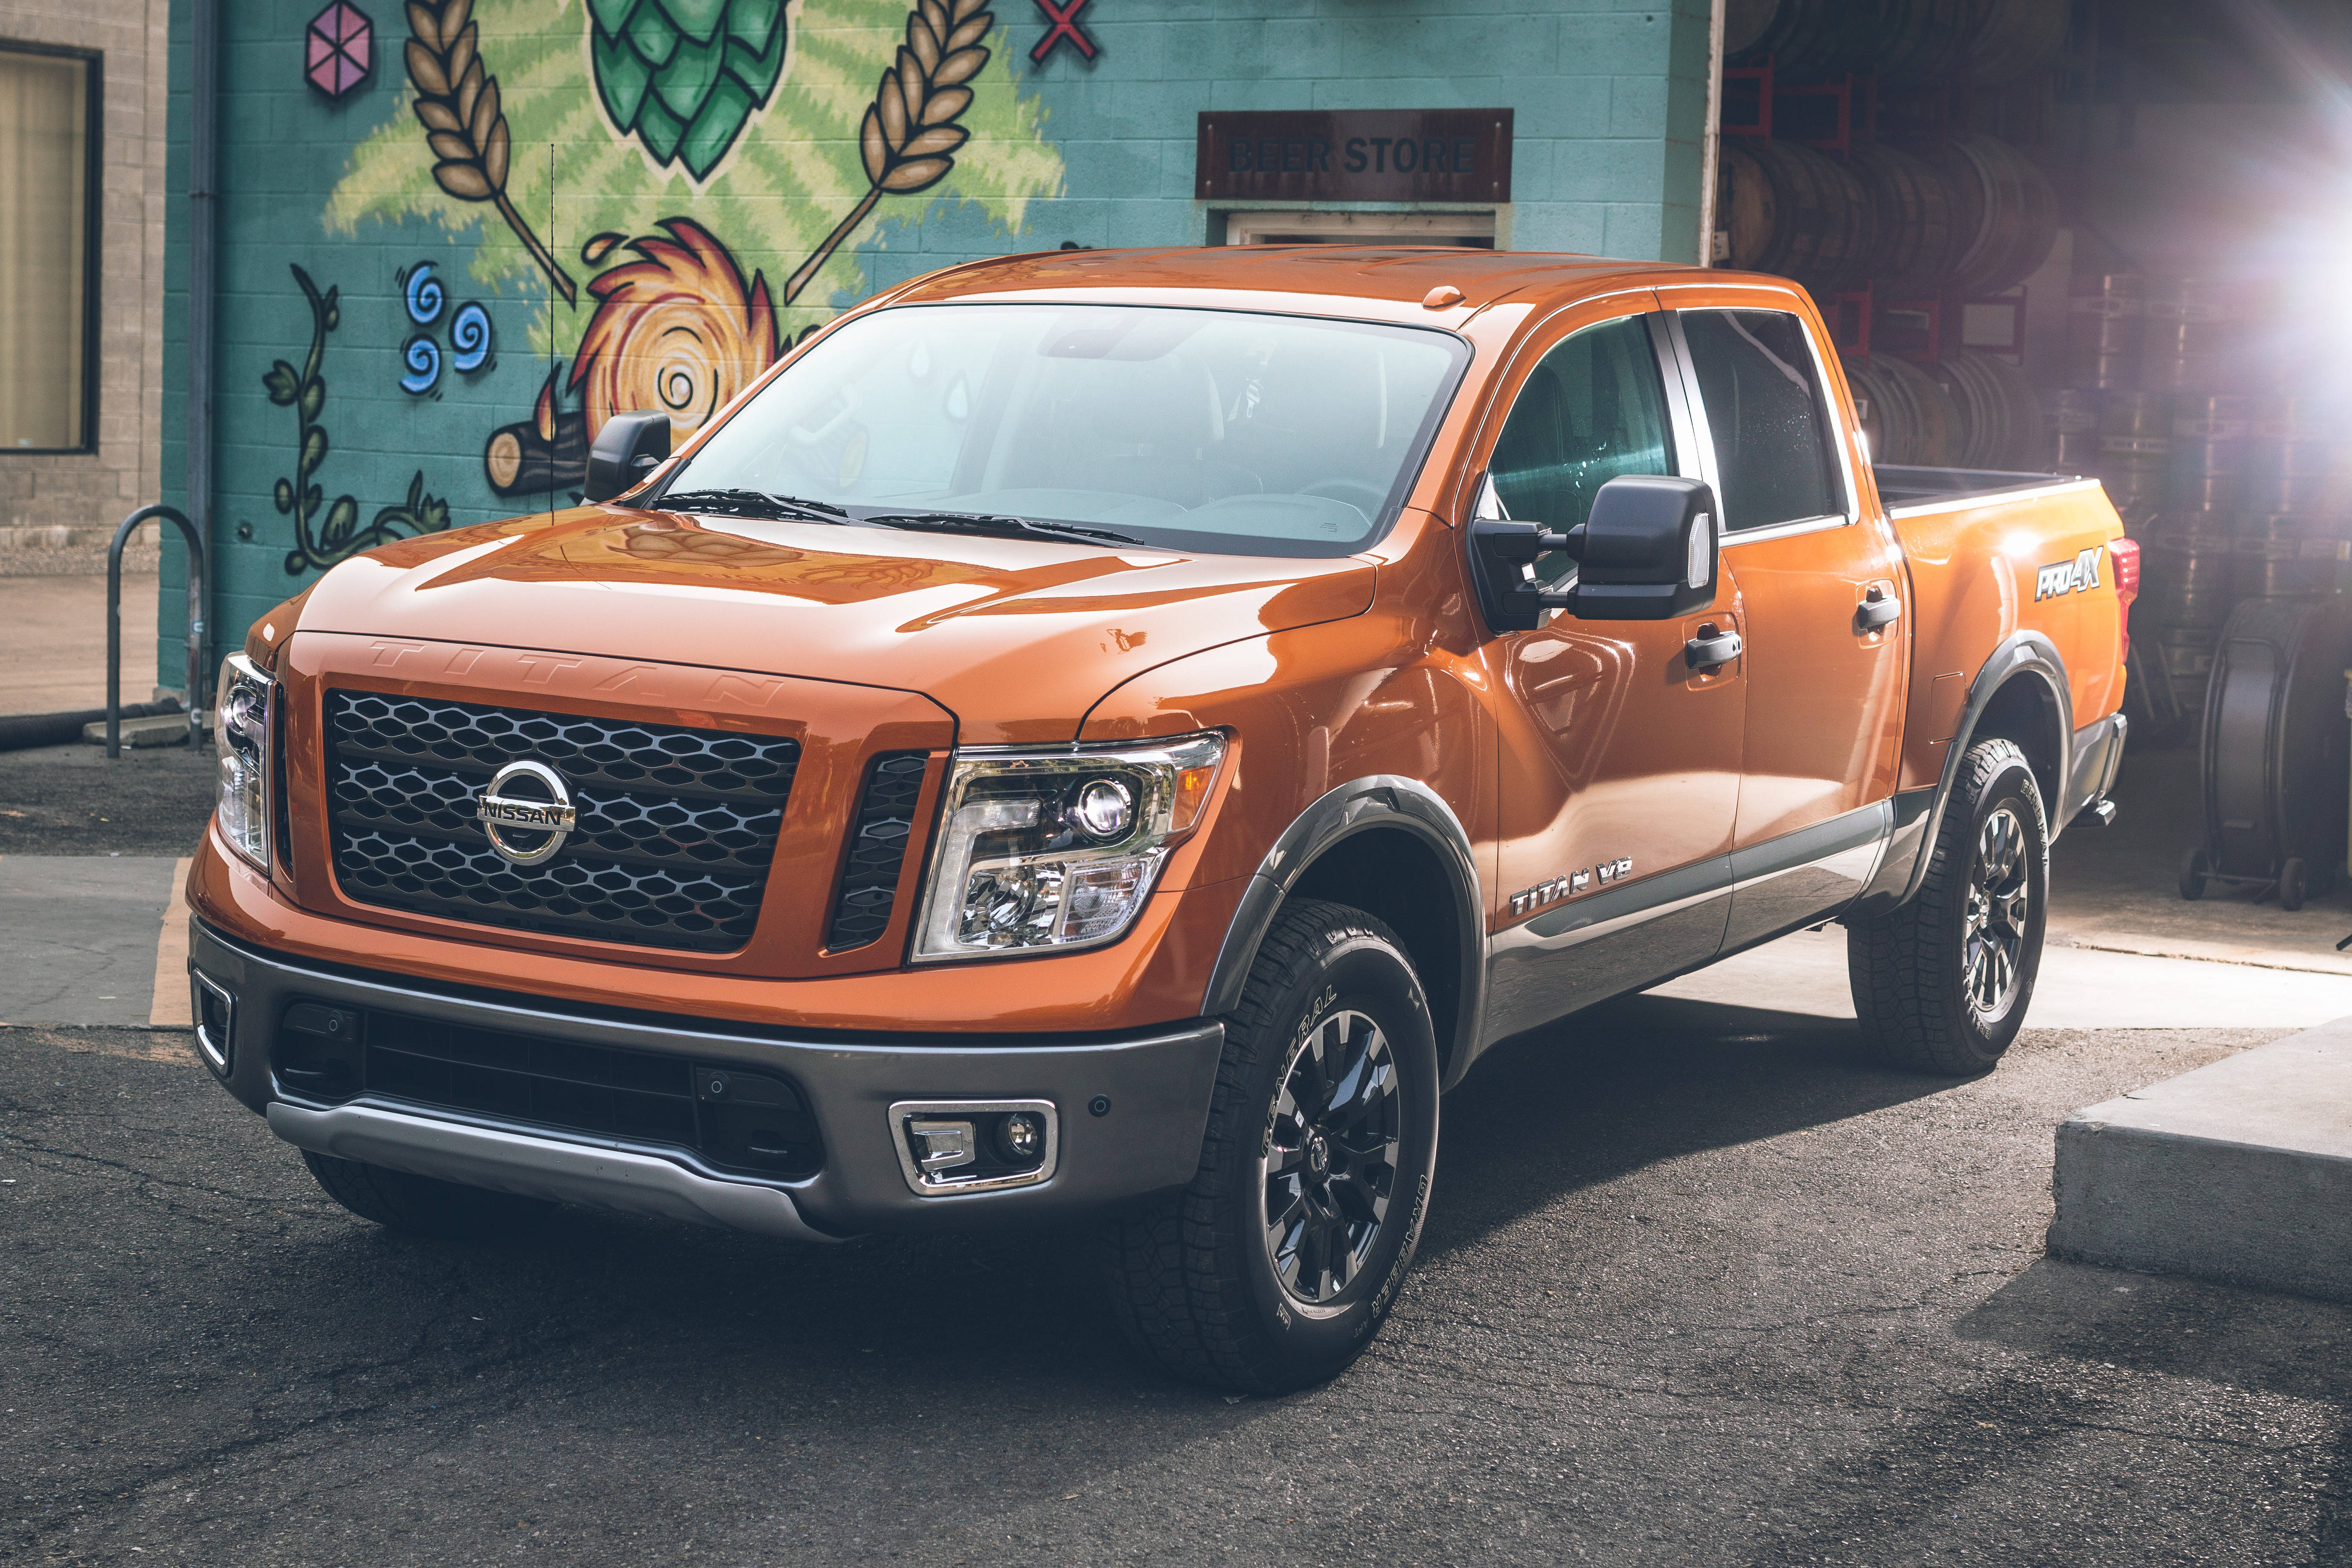 2019 Nissan TITAN Pro4X parked in the city